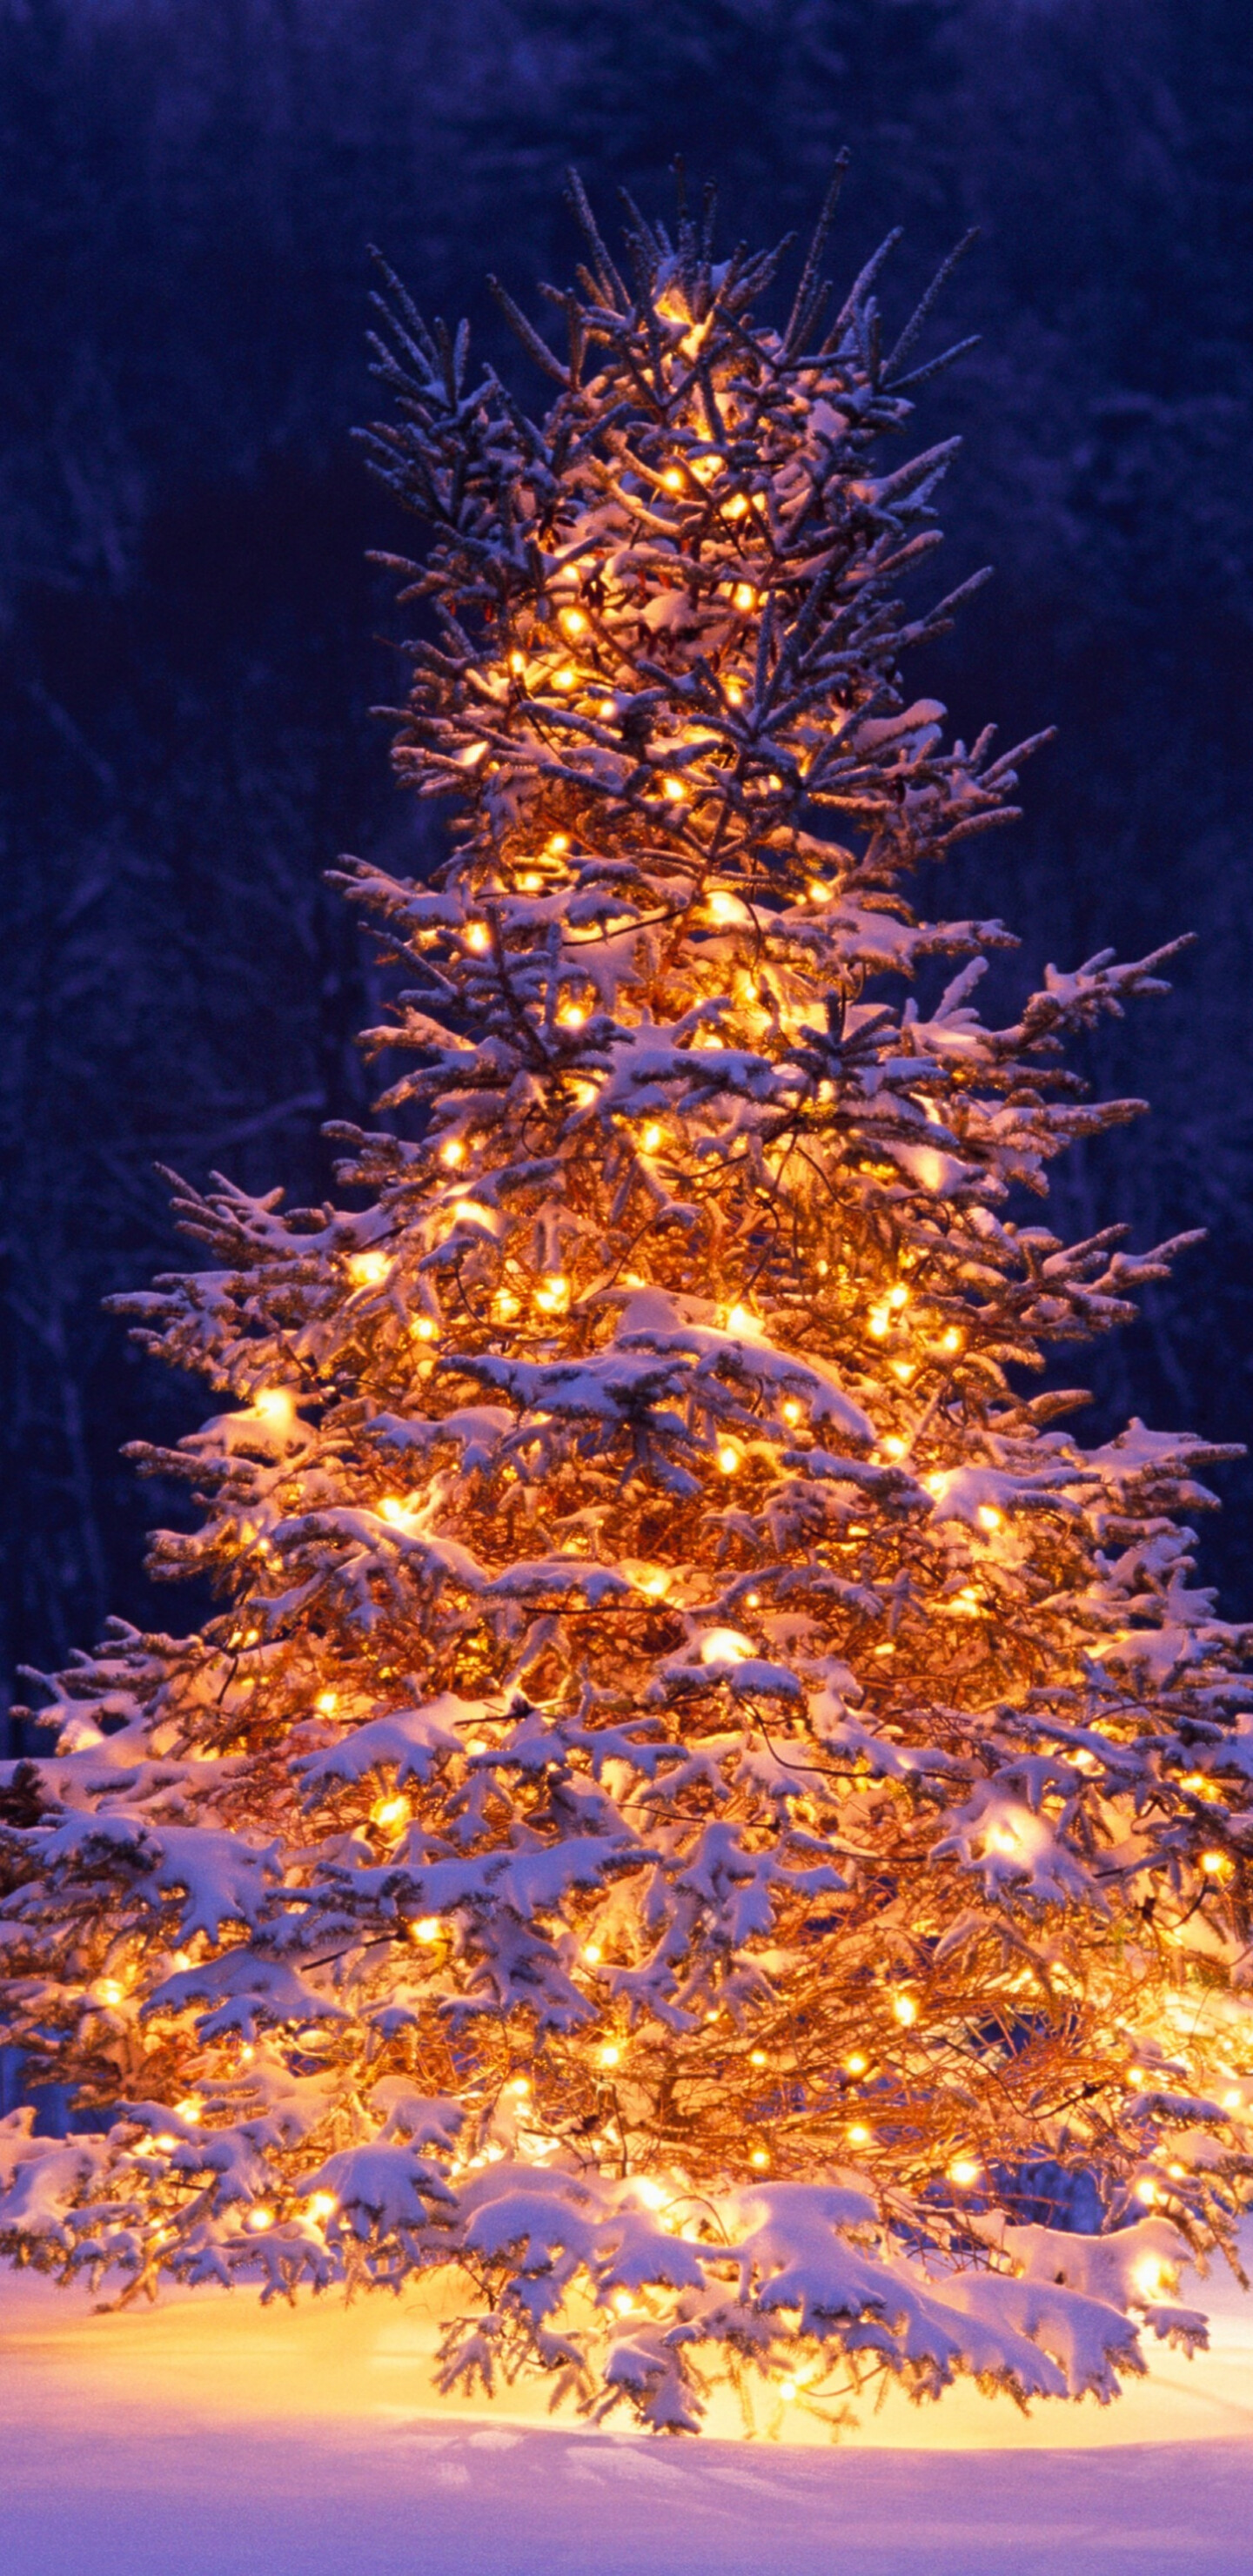 Christmas Tree: Holiday, Was popularized in the mid-19th century by Prince Albert, husband of Queen Victoria. 1440x2960 HD Wallpaper.